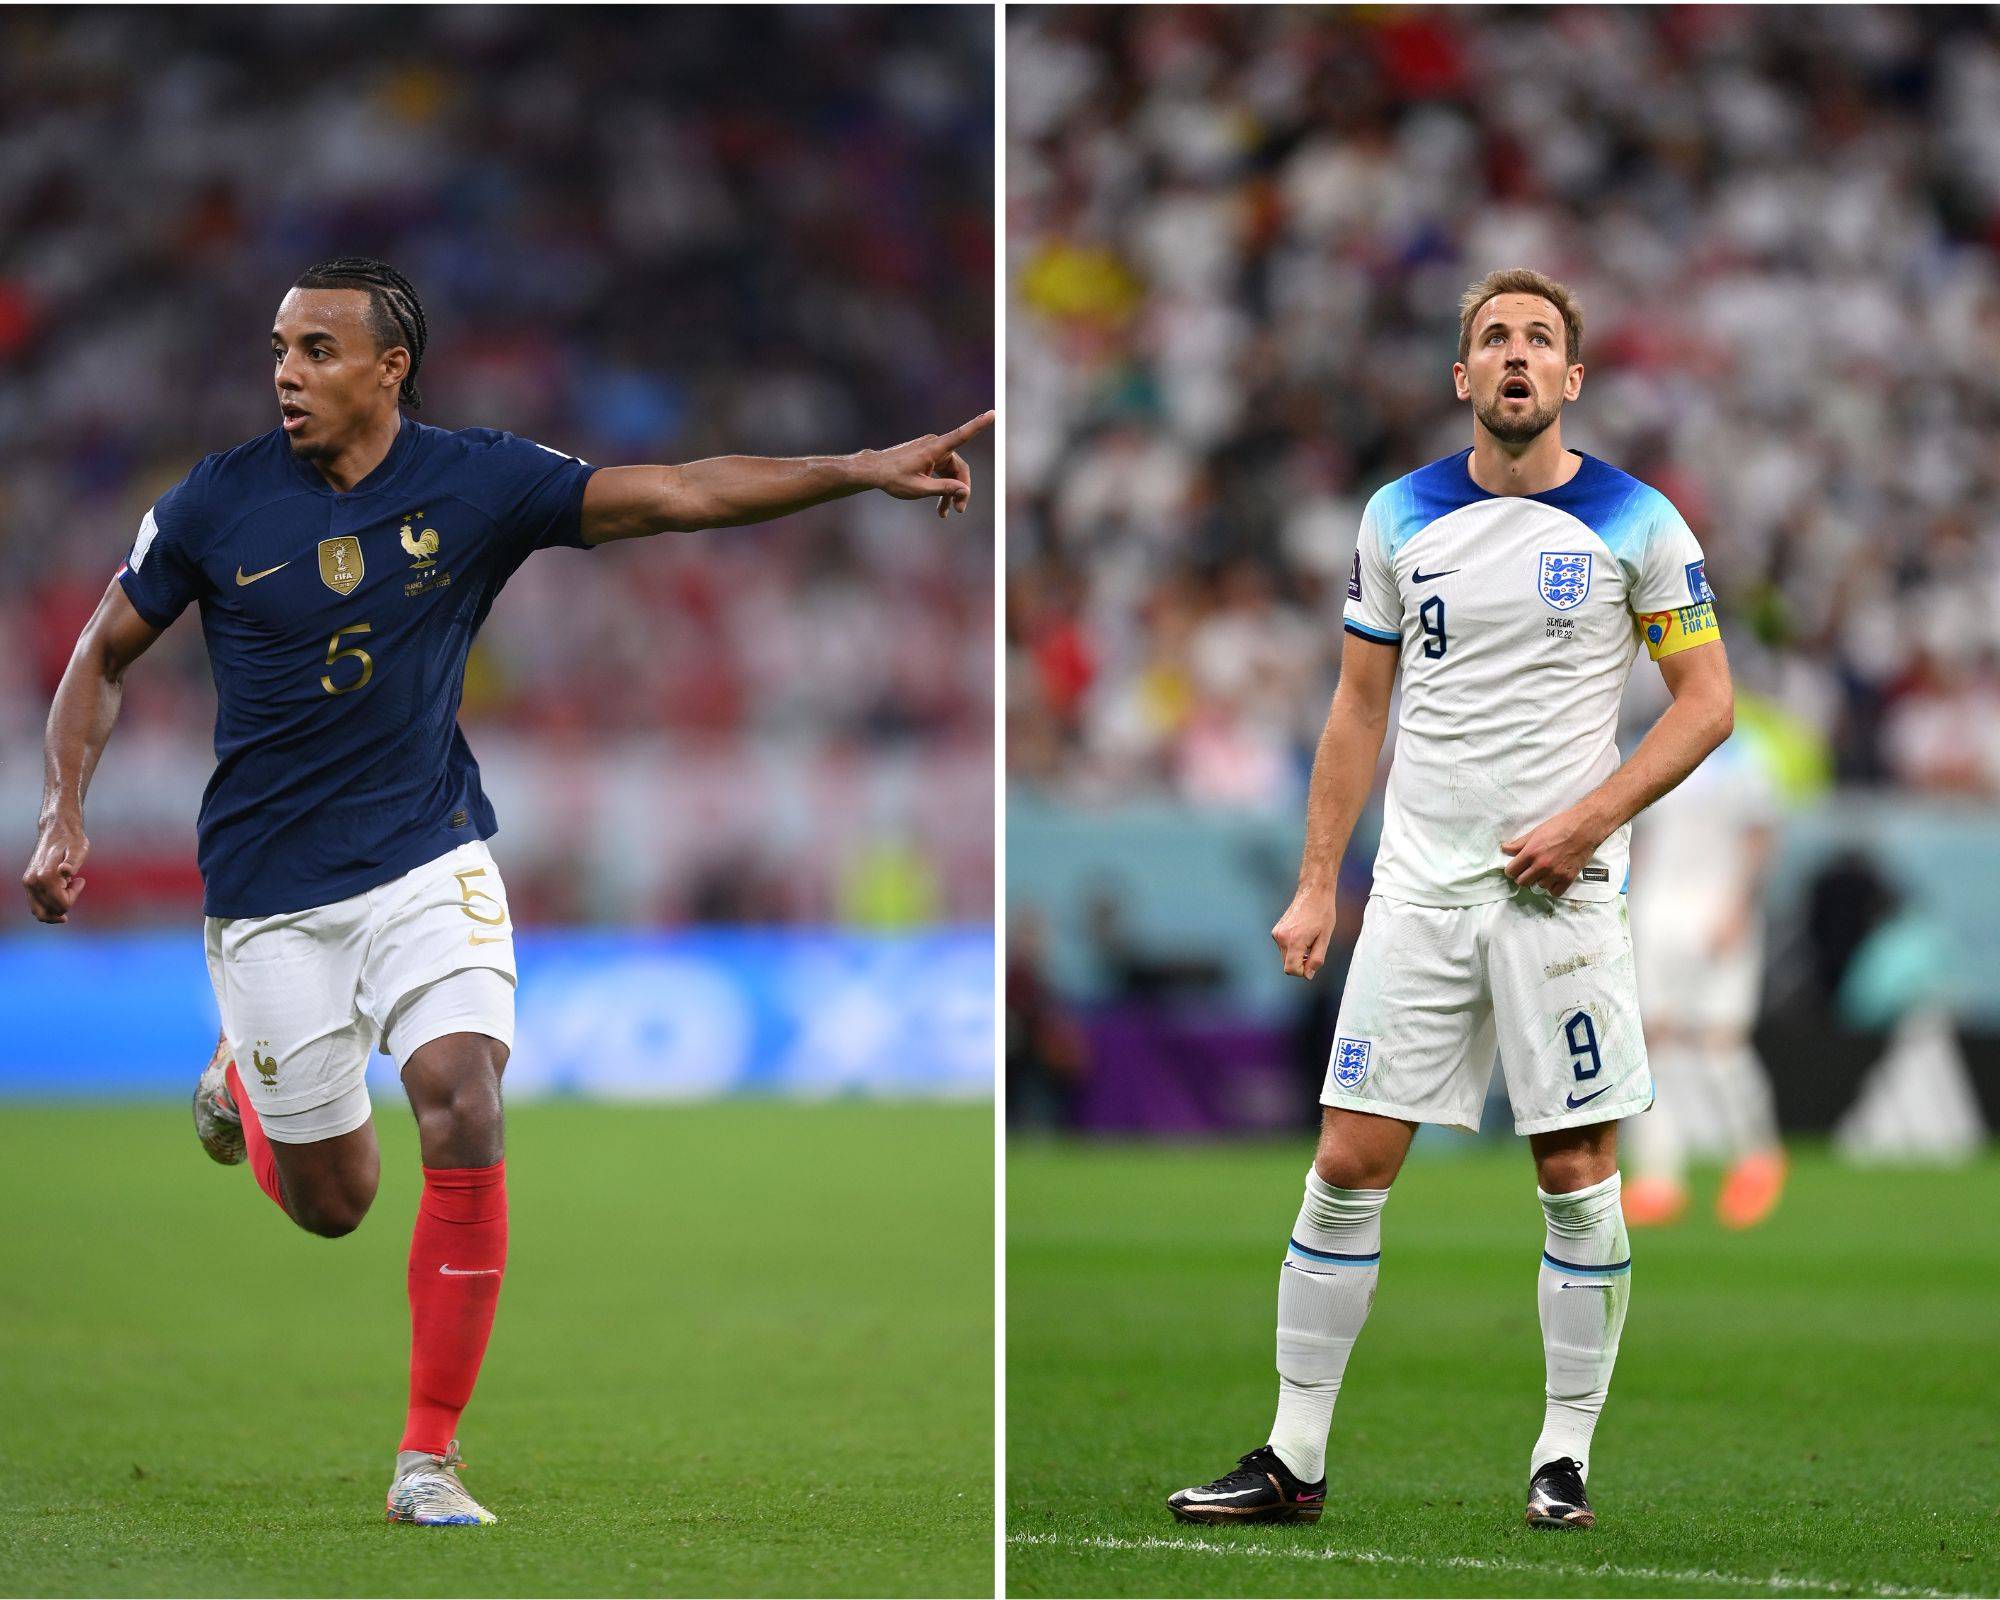 Jules Kounde for France and Harry Kane for England at the 2022 World Cup